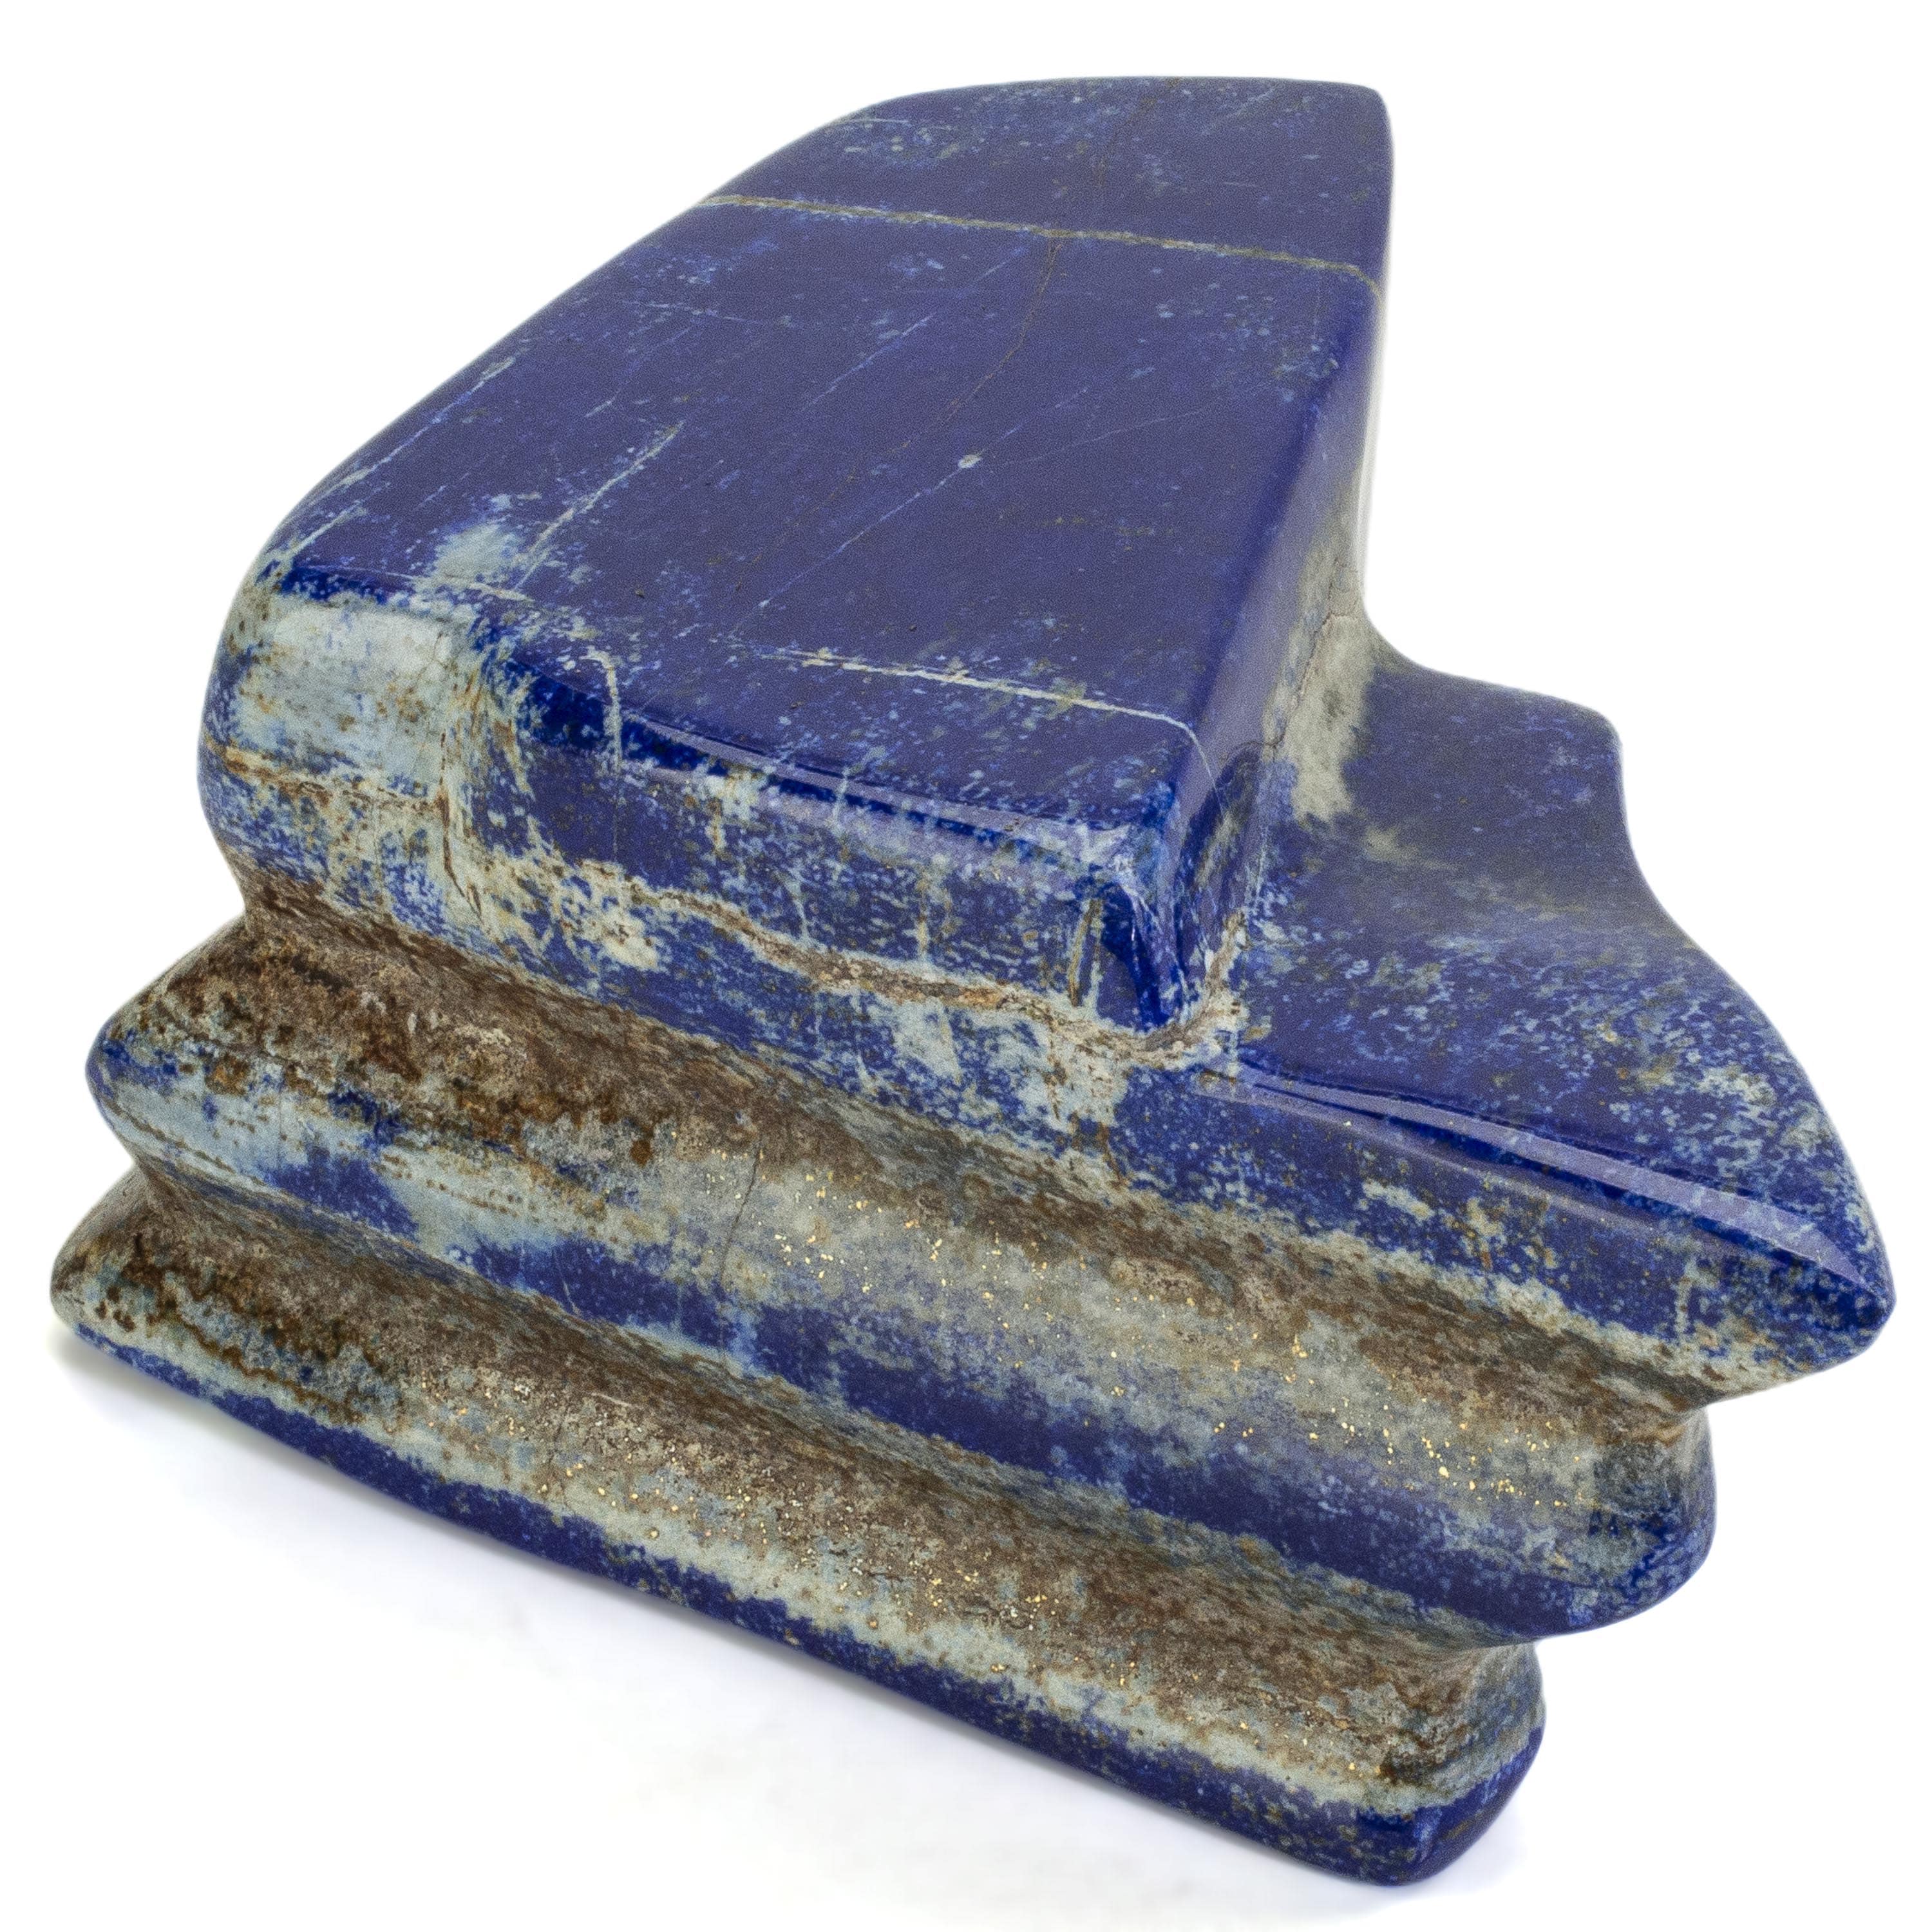 Kalifano Lapis Lapis Lazuil Freeform from Afghanistan - 1.8 kg / 4.1 lbs LP2000.002